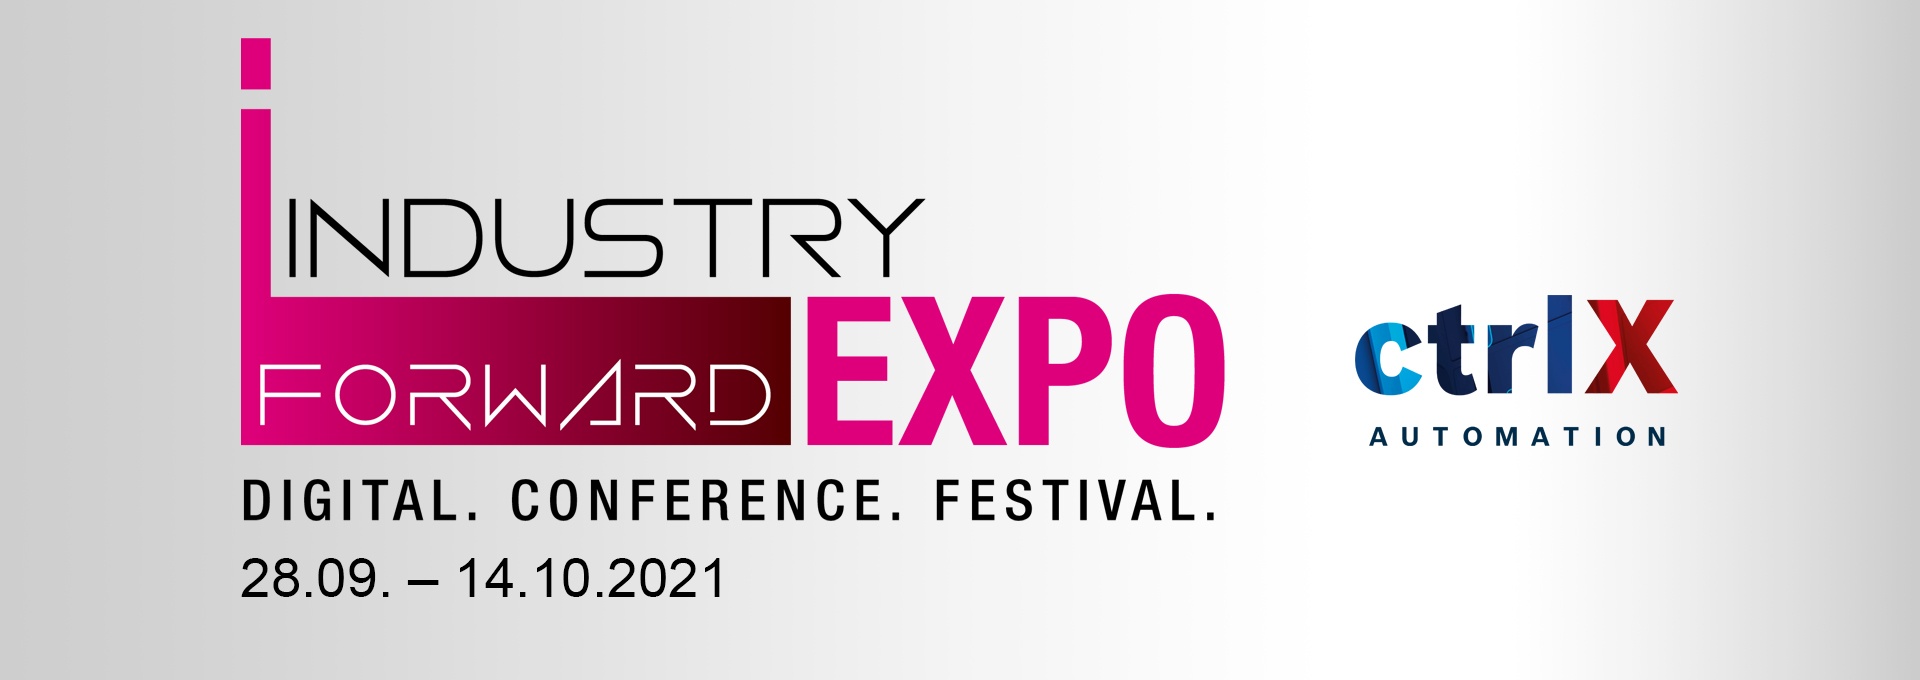 Logo der Messe INDUSTRY FORWARD EXPO